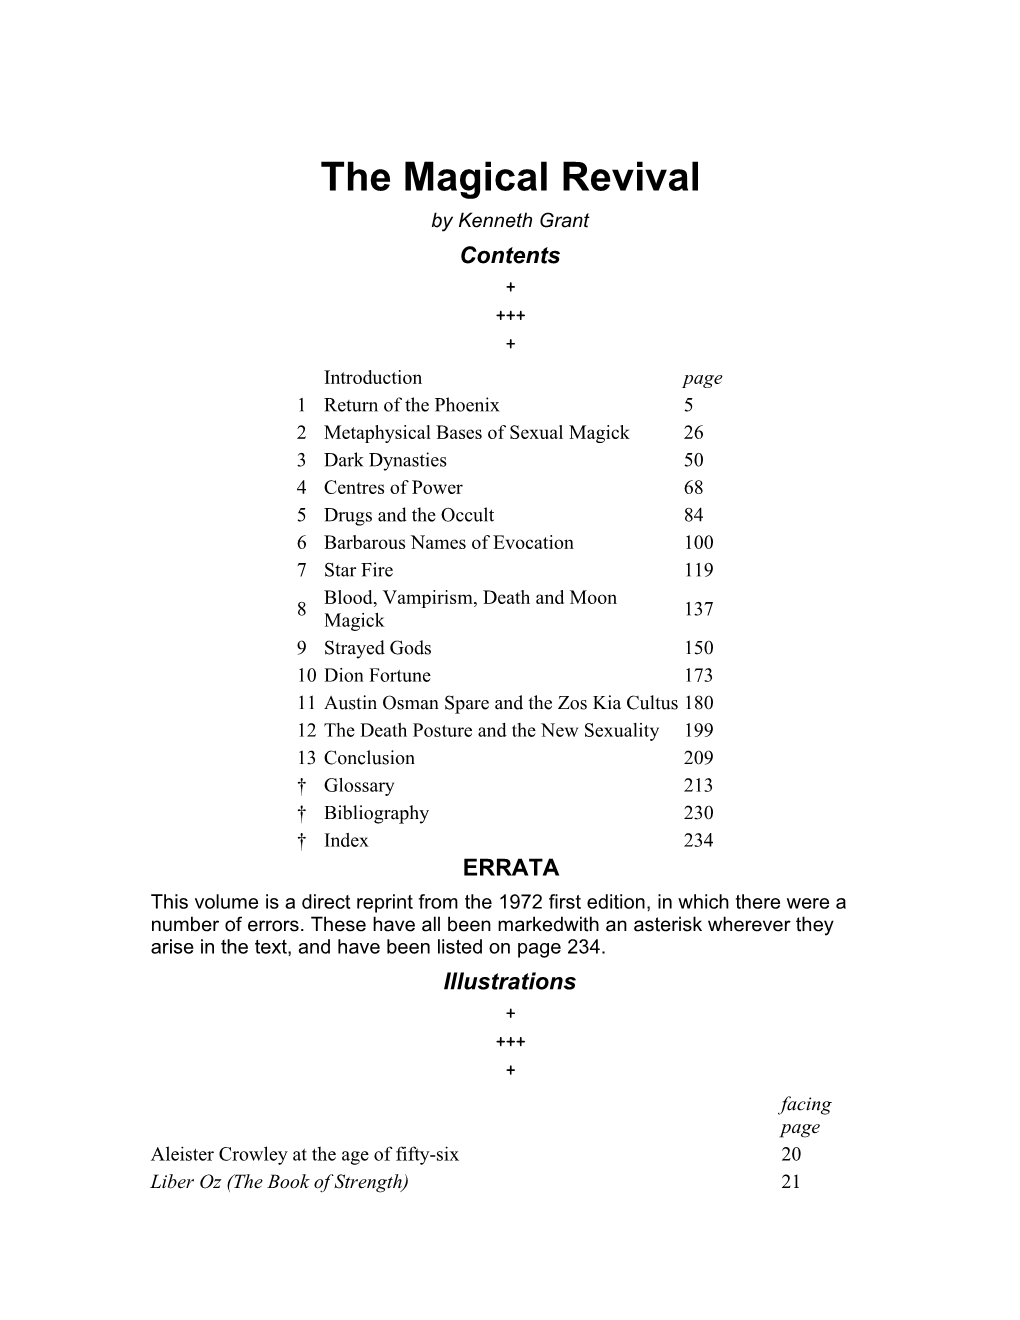 The Magical Revival